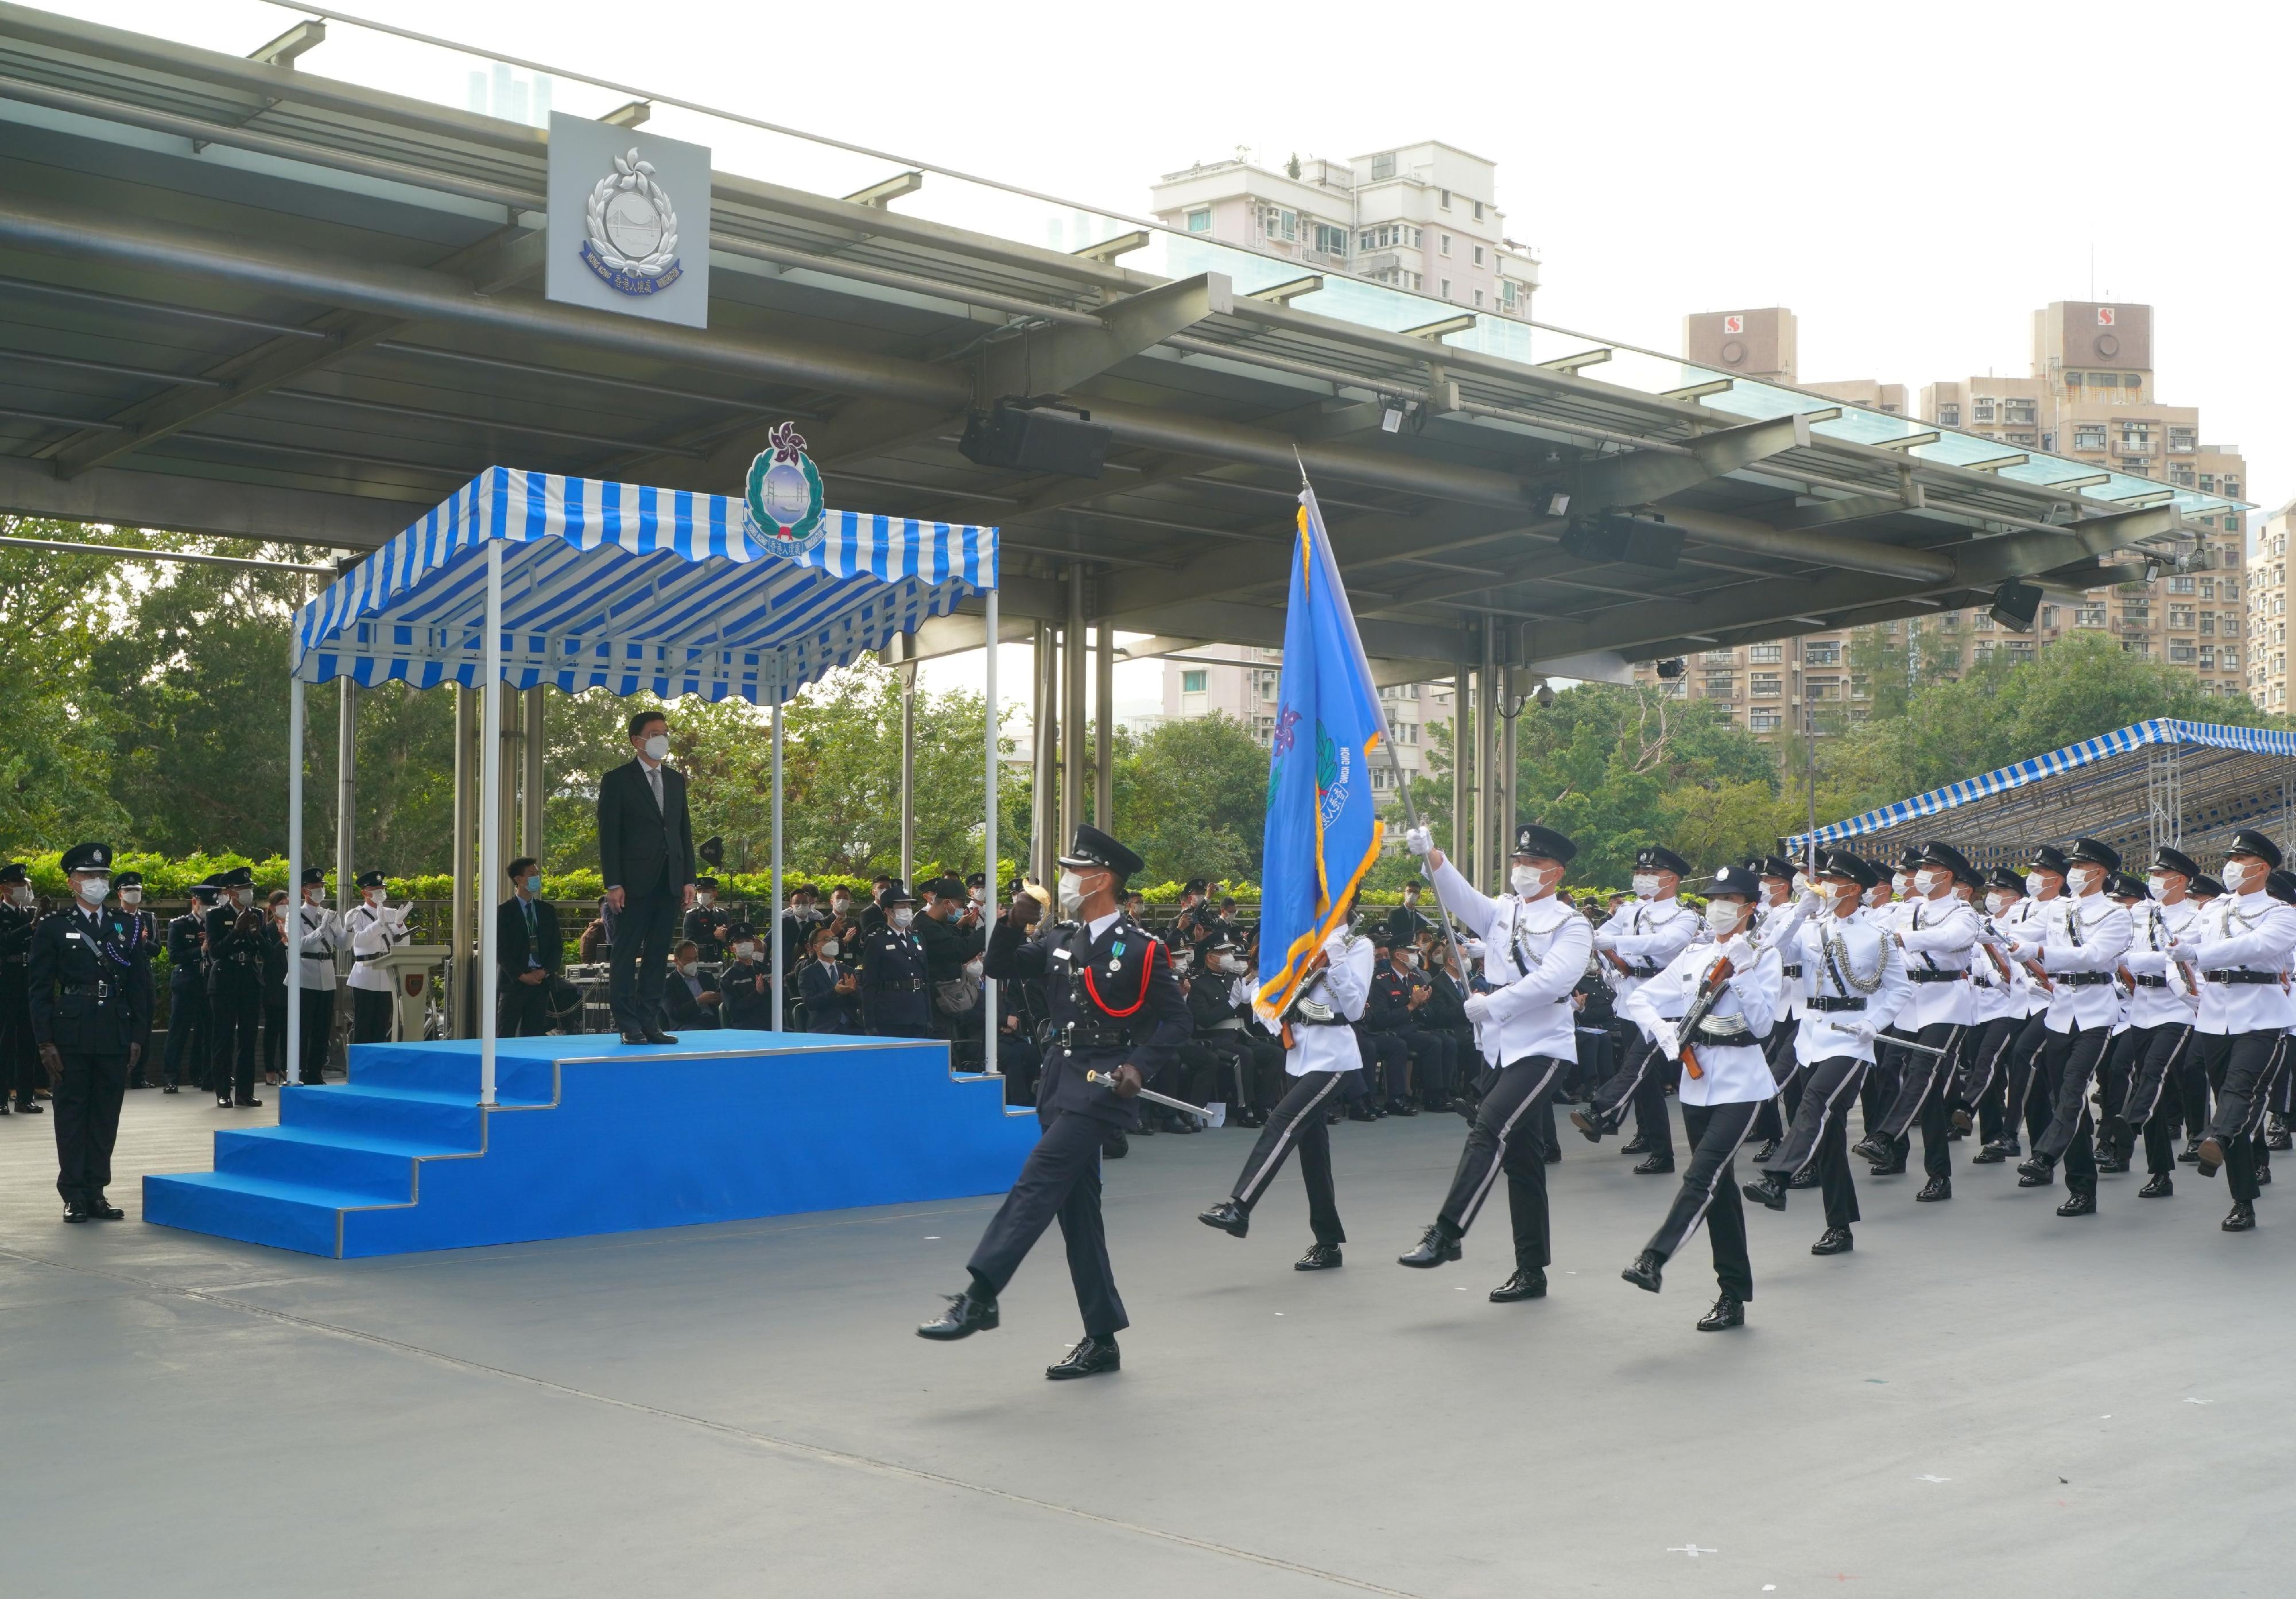 The Immigration Department Passing-out Parade was held today (December 2). Photo shows passing-out officers forming a grand phalanx and goose-stepping past the dais in the Chinese-style footdrill performance.